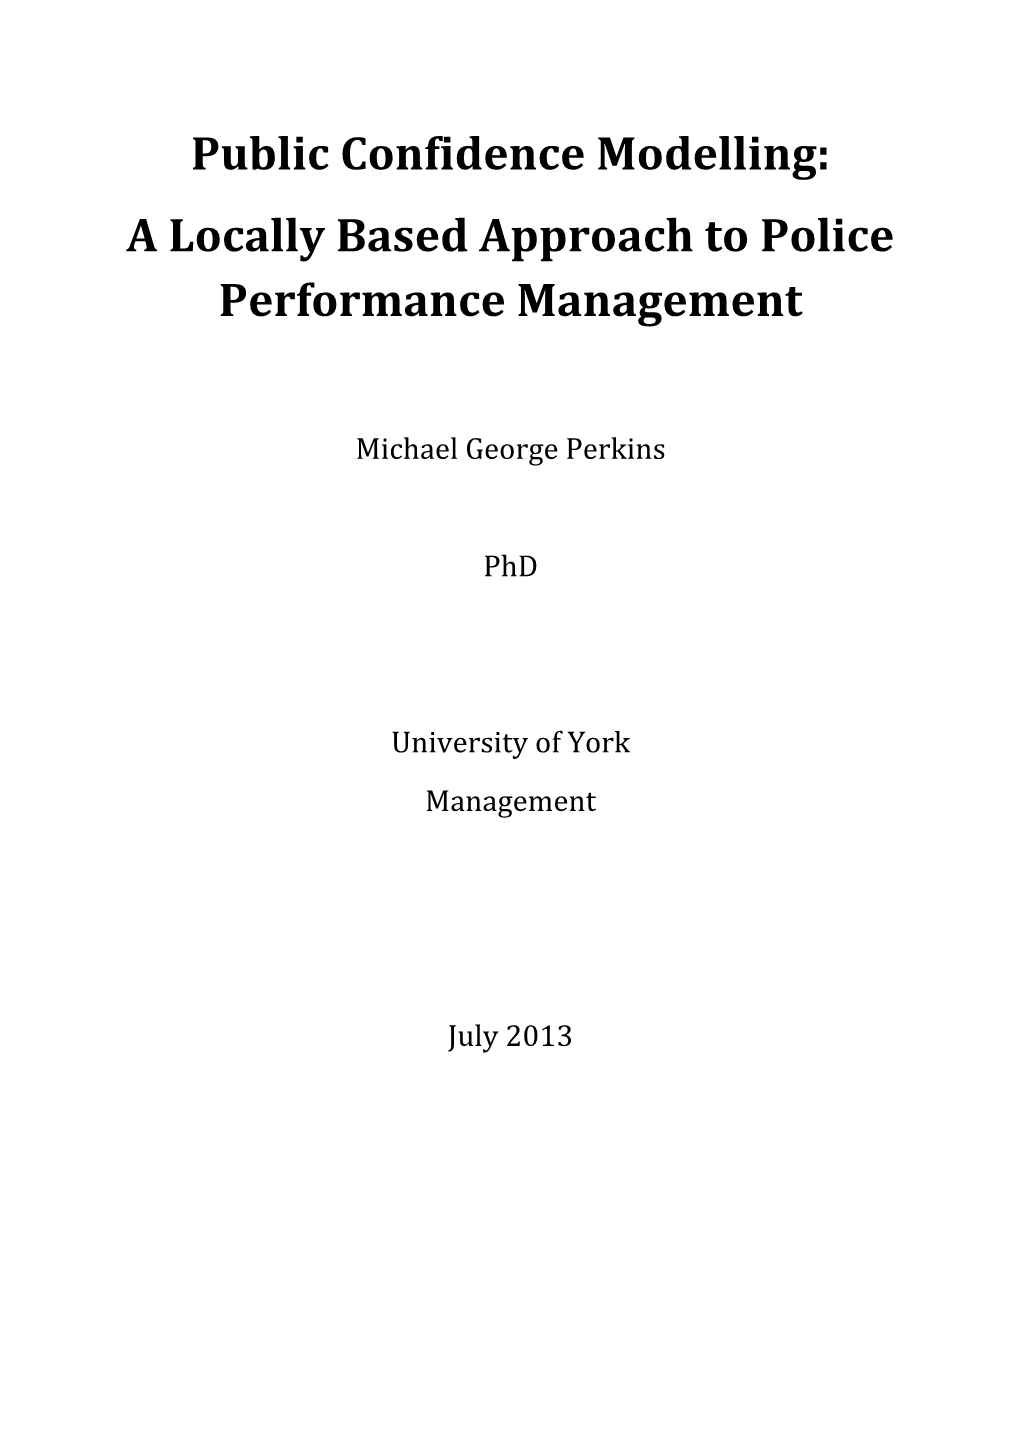 Public Confidence Modelling: a Locally Based Approach to Police Performance Management